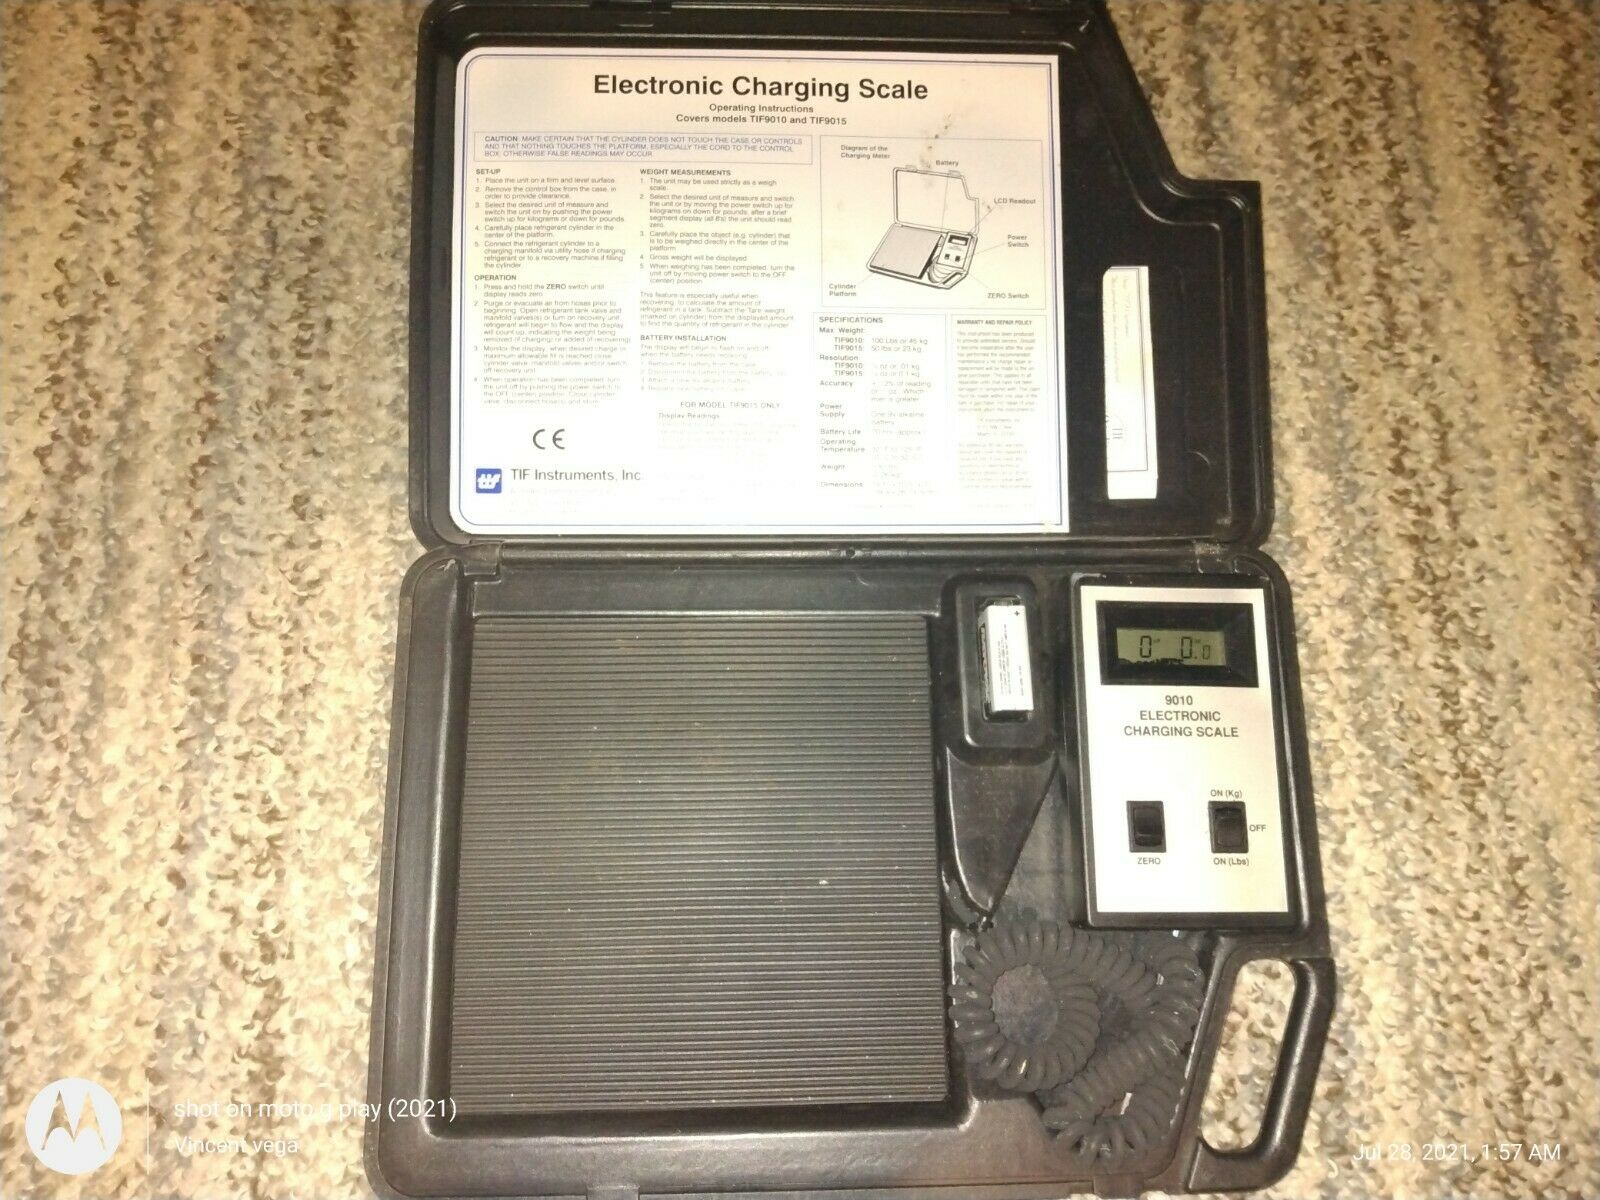 Tiff Instruments Electronic Charging Scale